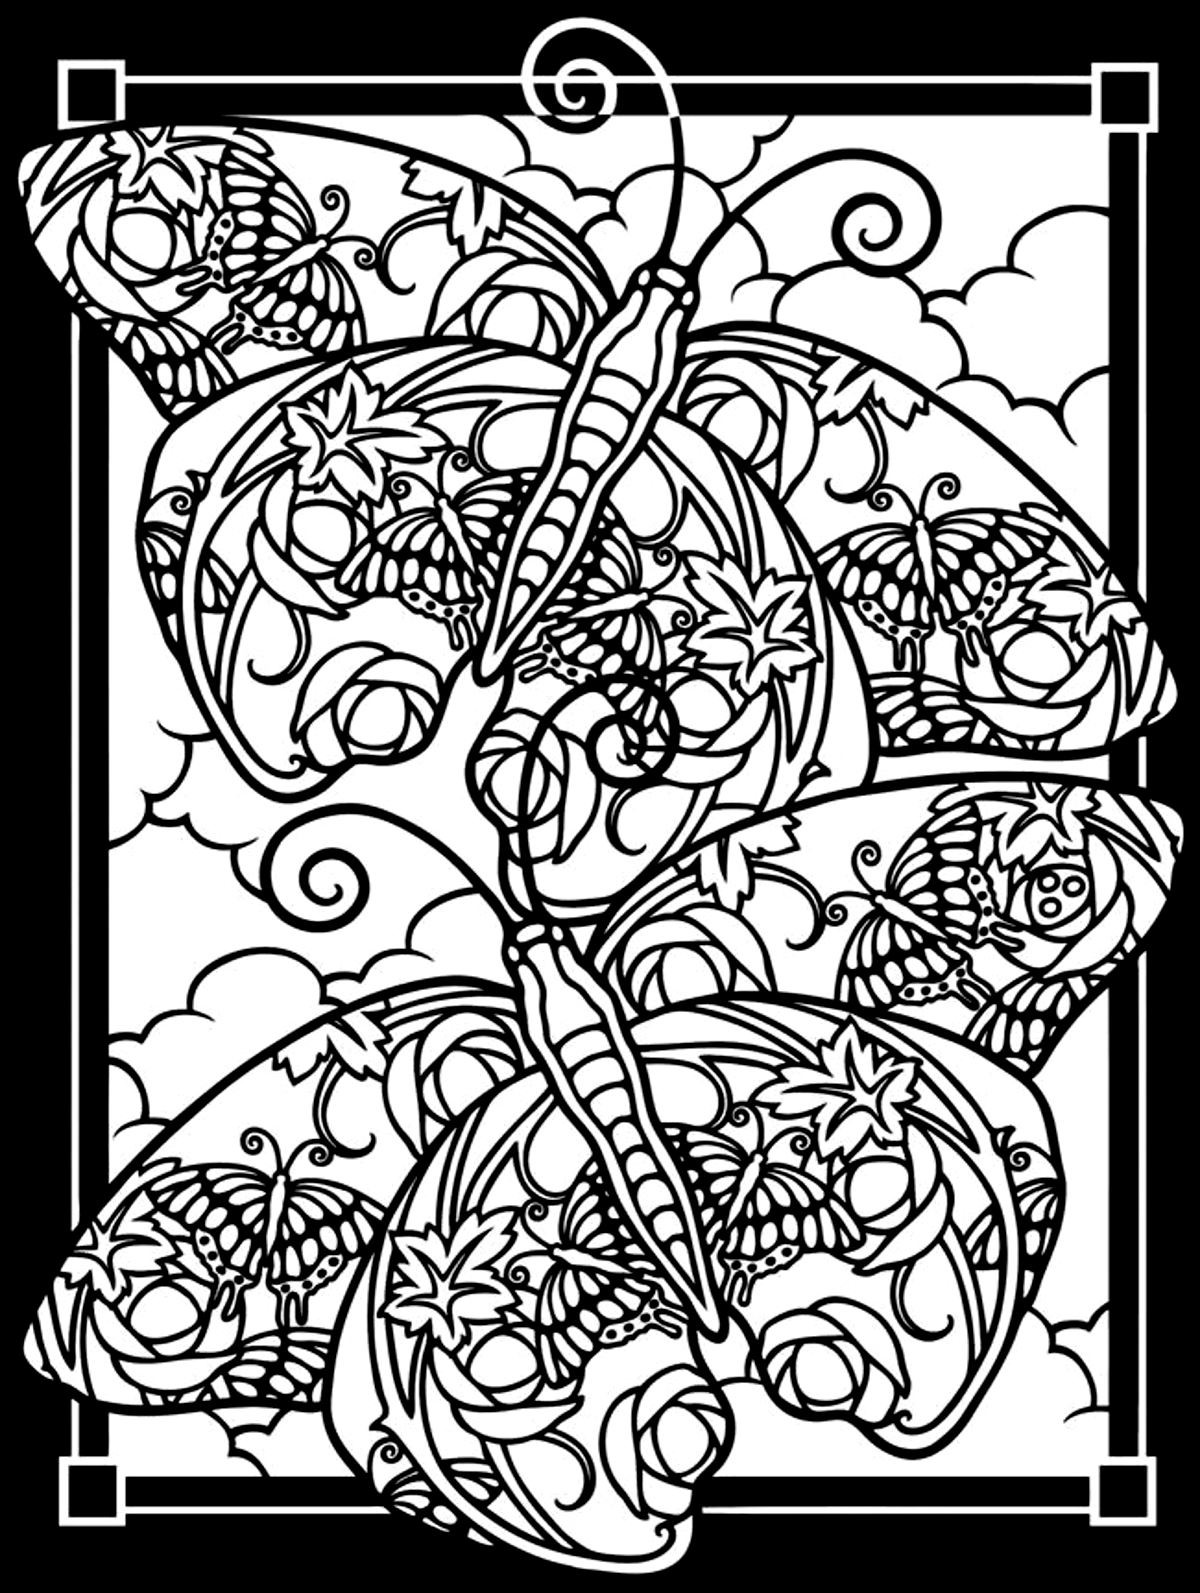 Butterfly Coloring Pages For Adults
 Coloring Pages Awesome Coloring Pages Butterflies For